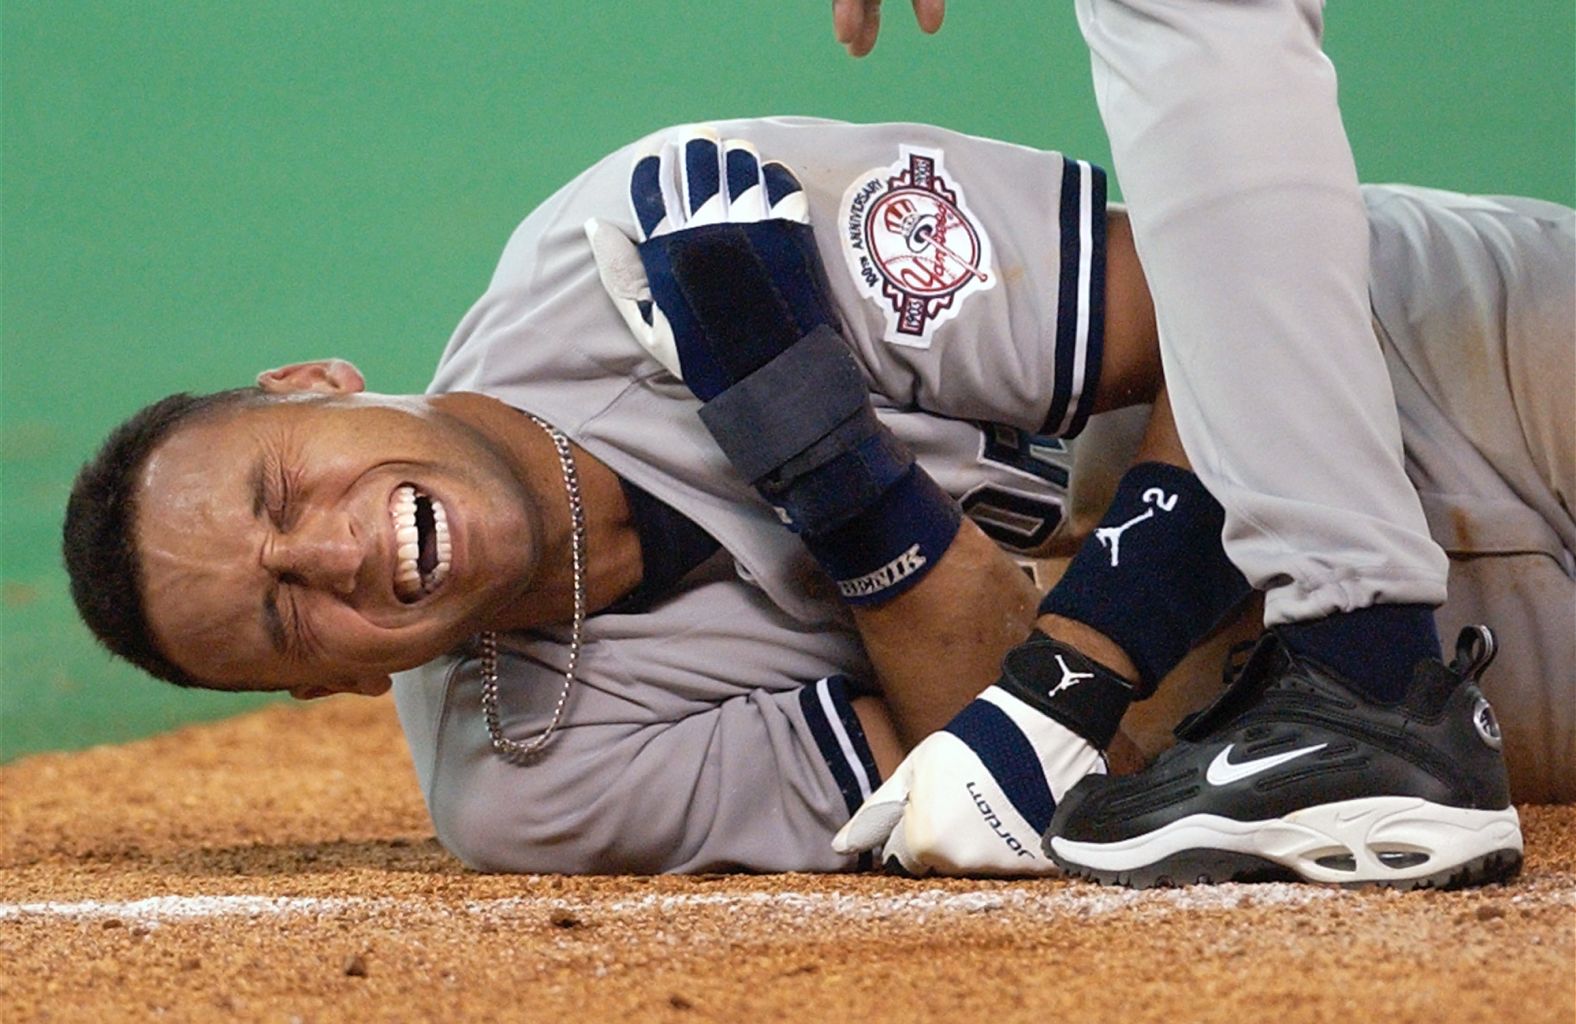 Jeter grimaces after a third-base collision in Toronto in March 2003. Jeter hurt his shoulder and went on the disabled list. It was one of the few times in Jeter's 20-year career that he missed significant time because of injury.